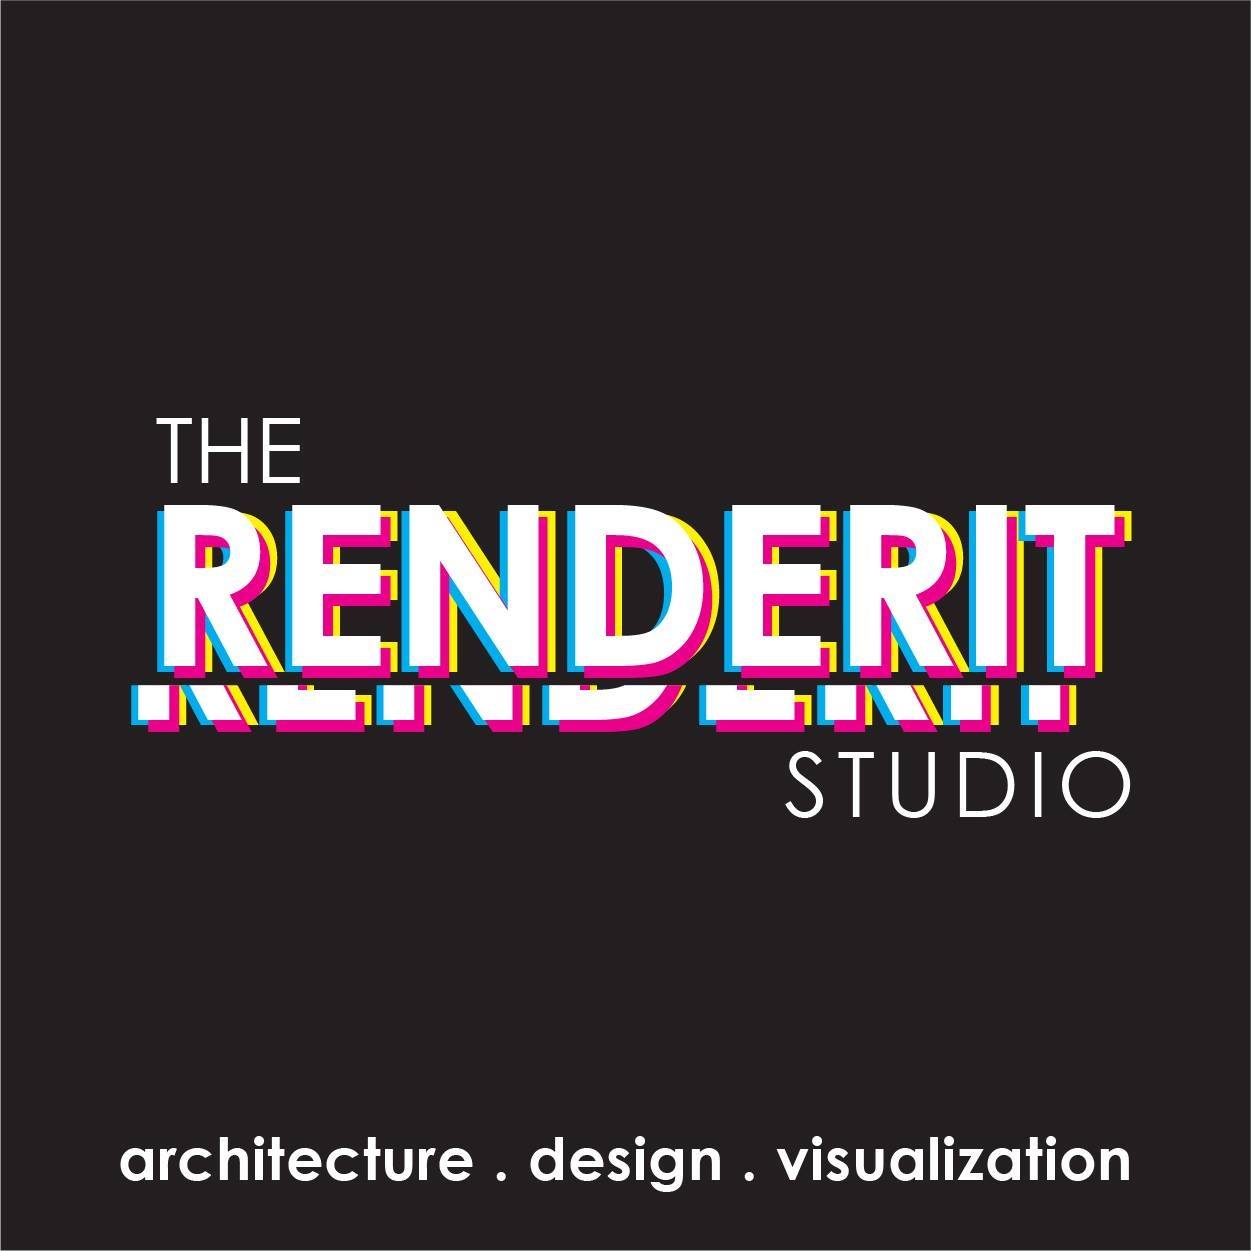 The Renderit Studio|Accounting Services|Professional Services